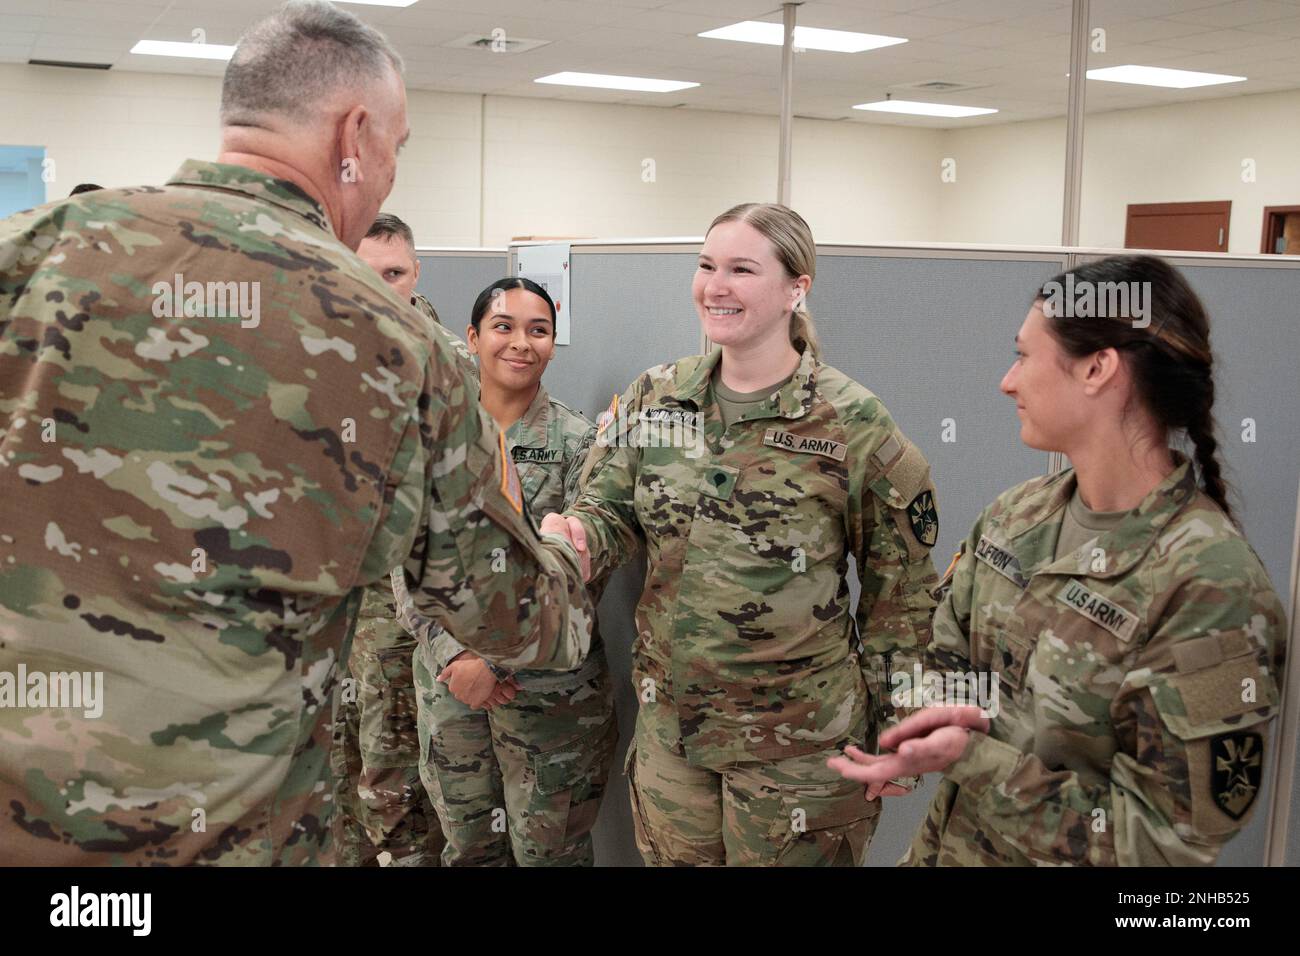 Arizona Army National Guard Brig. Gen. Lonnie J. Branum, land component commander, presents his coin to Spc. Emily Nottingham, a human resources specialist with the 198th RSG HHC, July 28, 2022, during his visit to Camp Shelby Joint Forces Training Center in Mississippi. Spc. Nottingham, who was at CSJFTC with her unit for  annual training, was recognized for her can do attitude and willingness to work outside her MOS during the mobilization exercise Pershing Strike 2022. (Arizona Army National Guard photo by Sgt. 1st Brian A. Barbour) Stock Photo